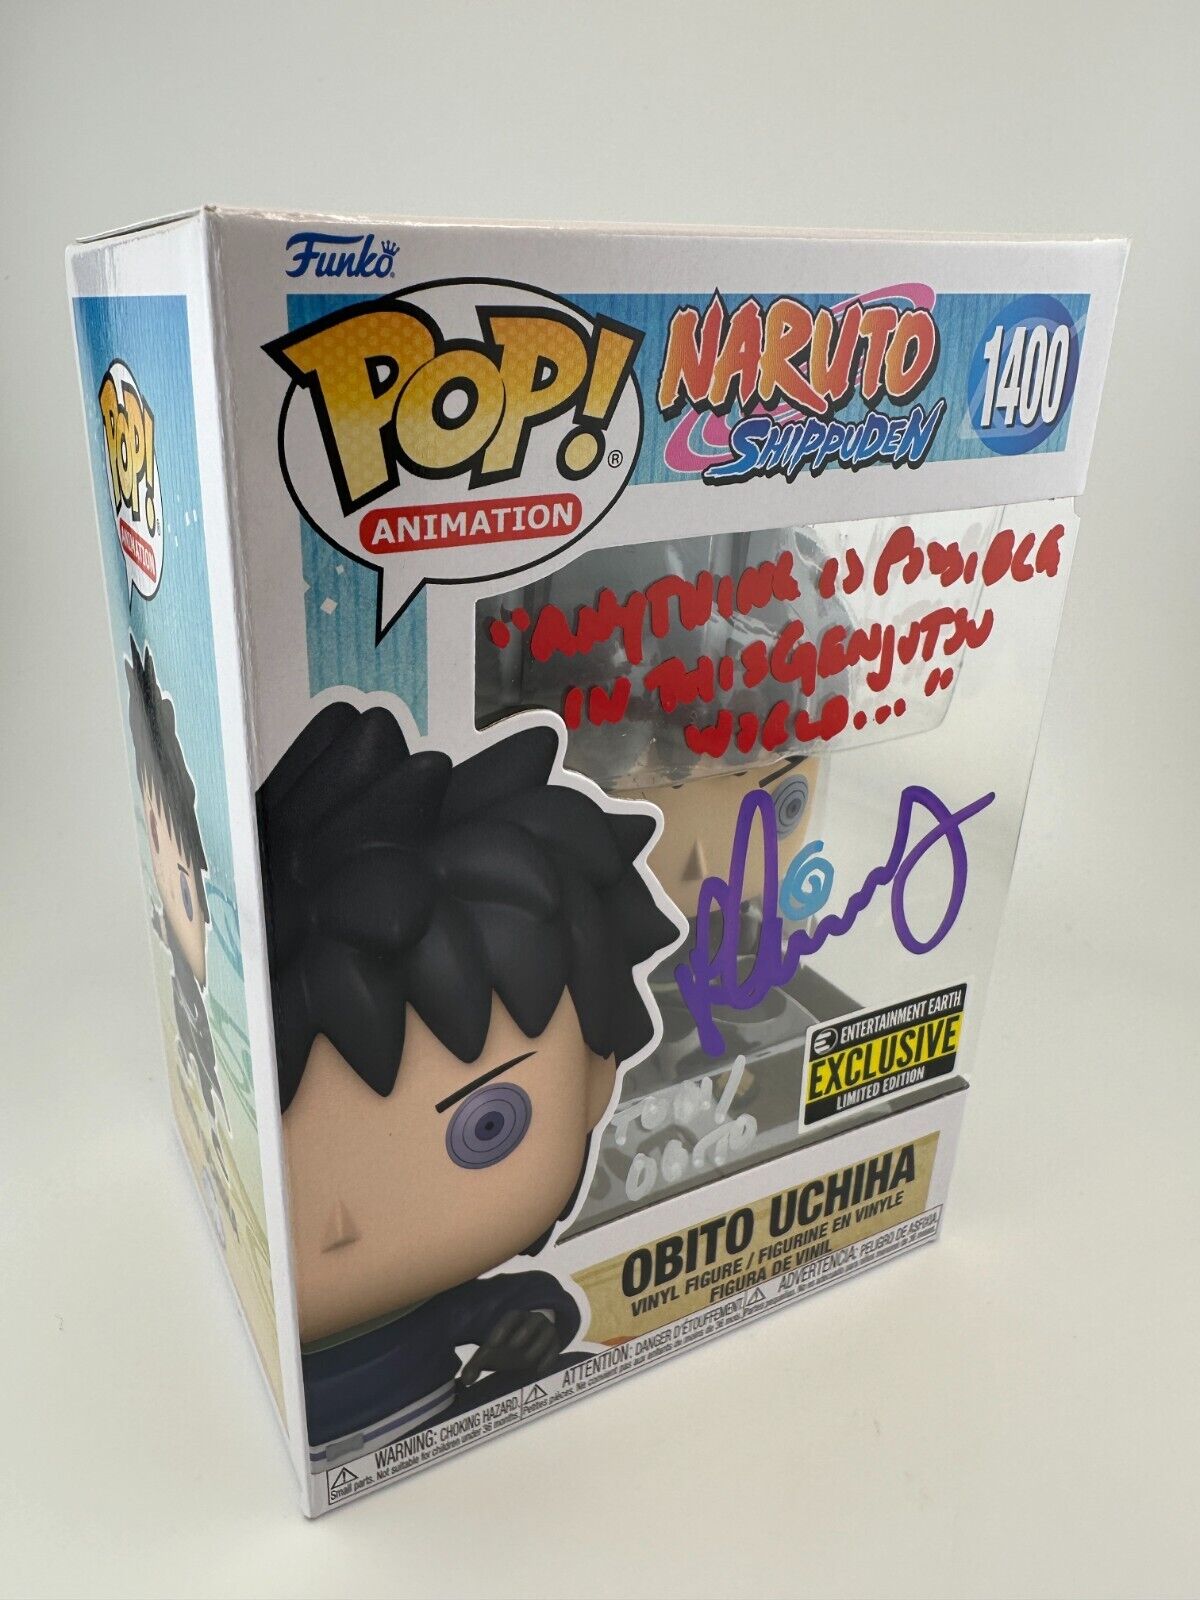 Funko Pop Naruto OBITO UCHIHA Signed w/ Remarks #1400 EE Exclusive JSA Authentic